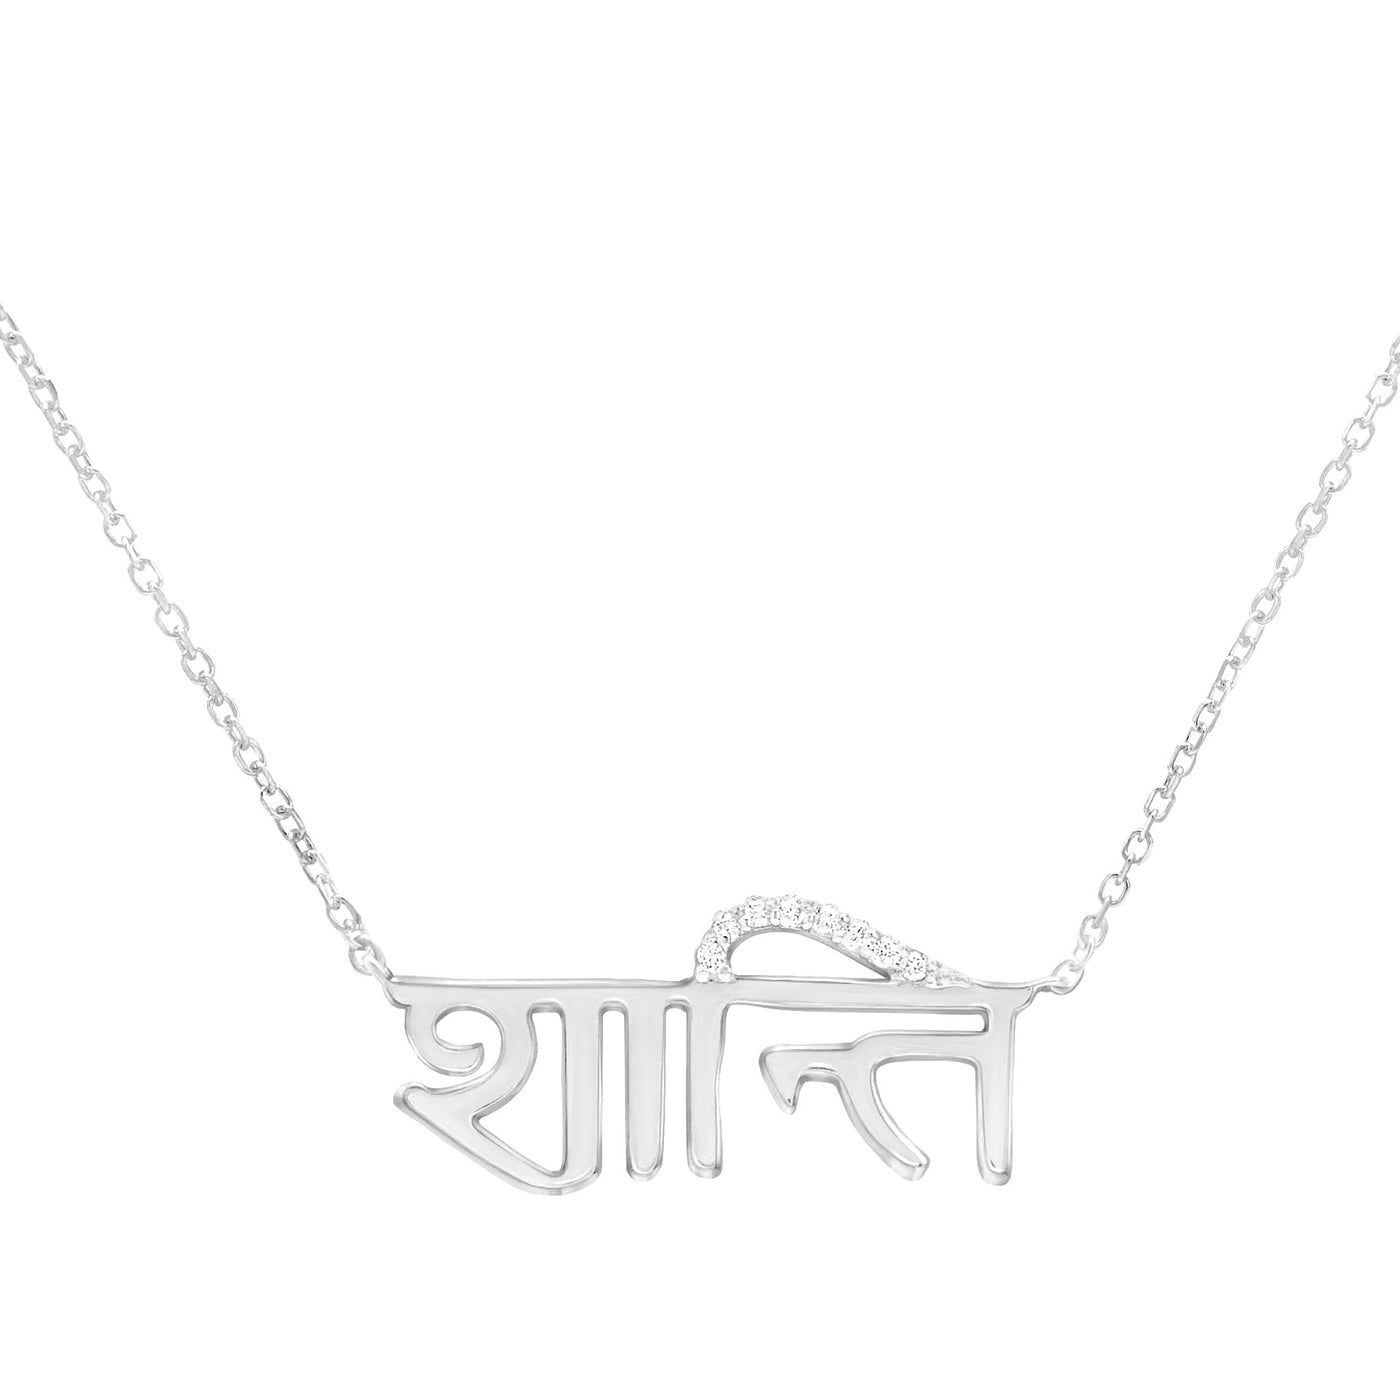 The Shanti Necklace